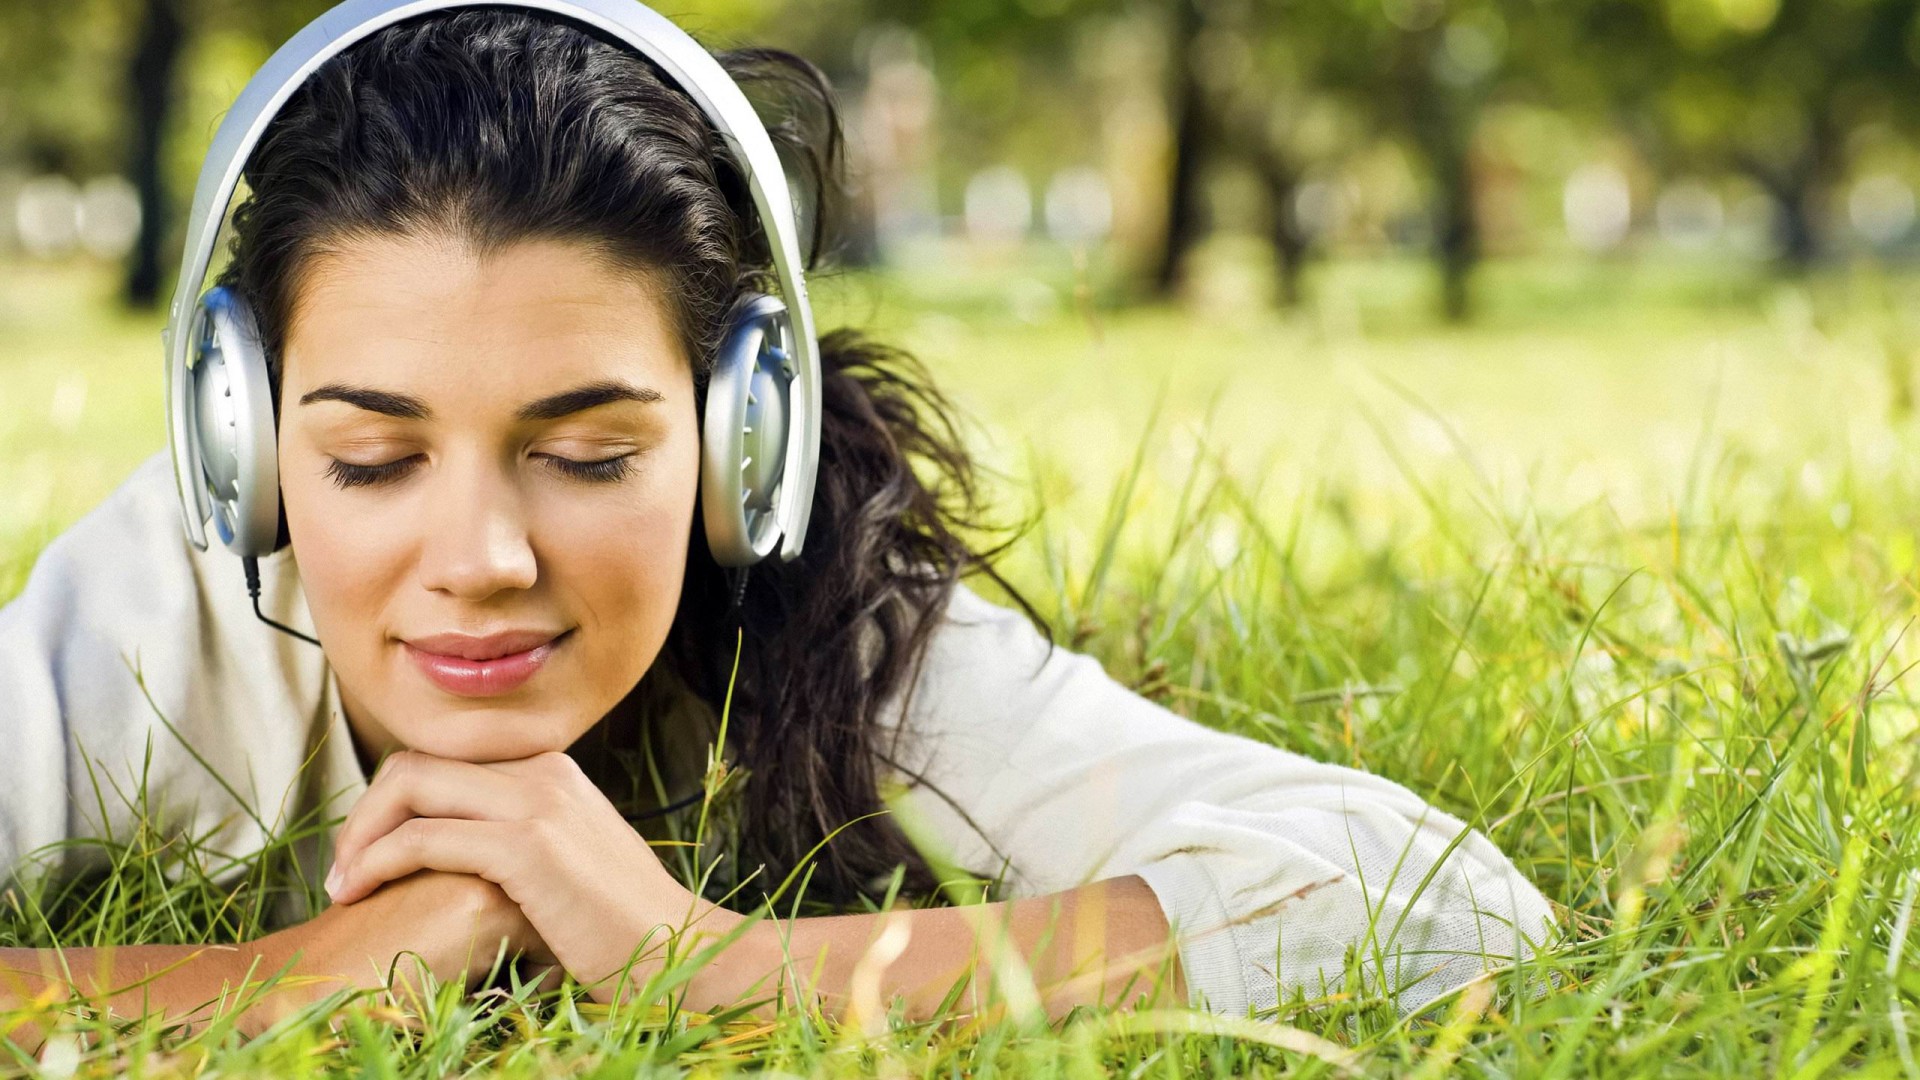 The Power of Music: 5 Health Benefits of Music